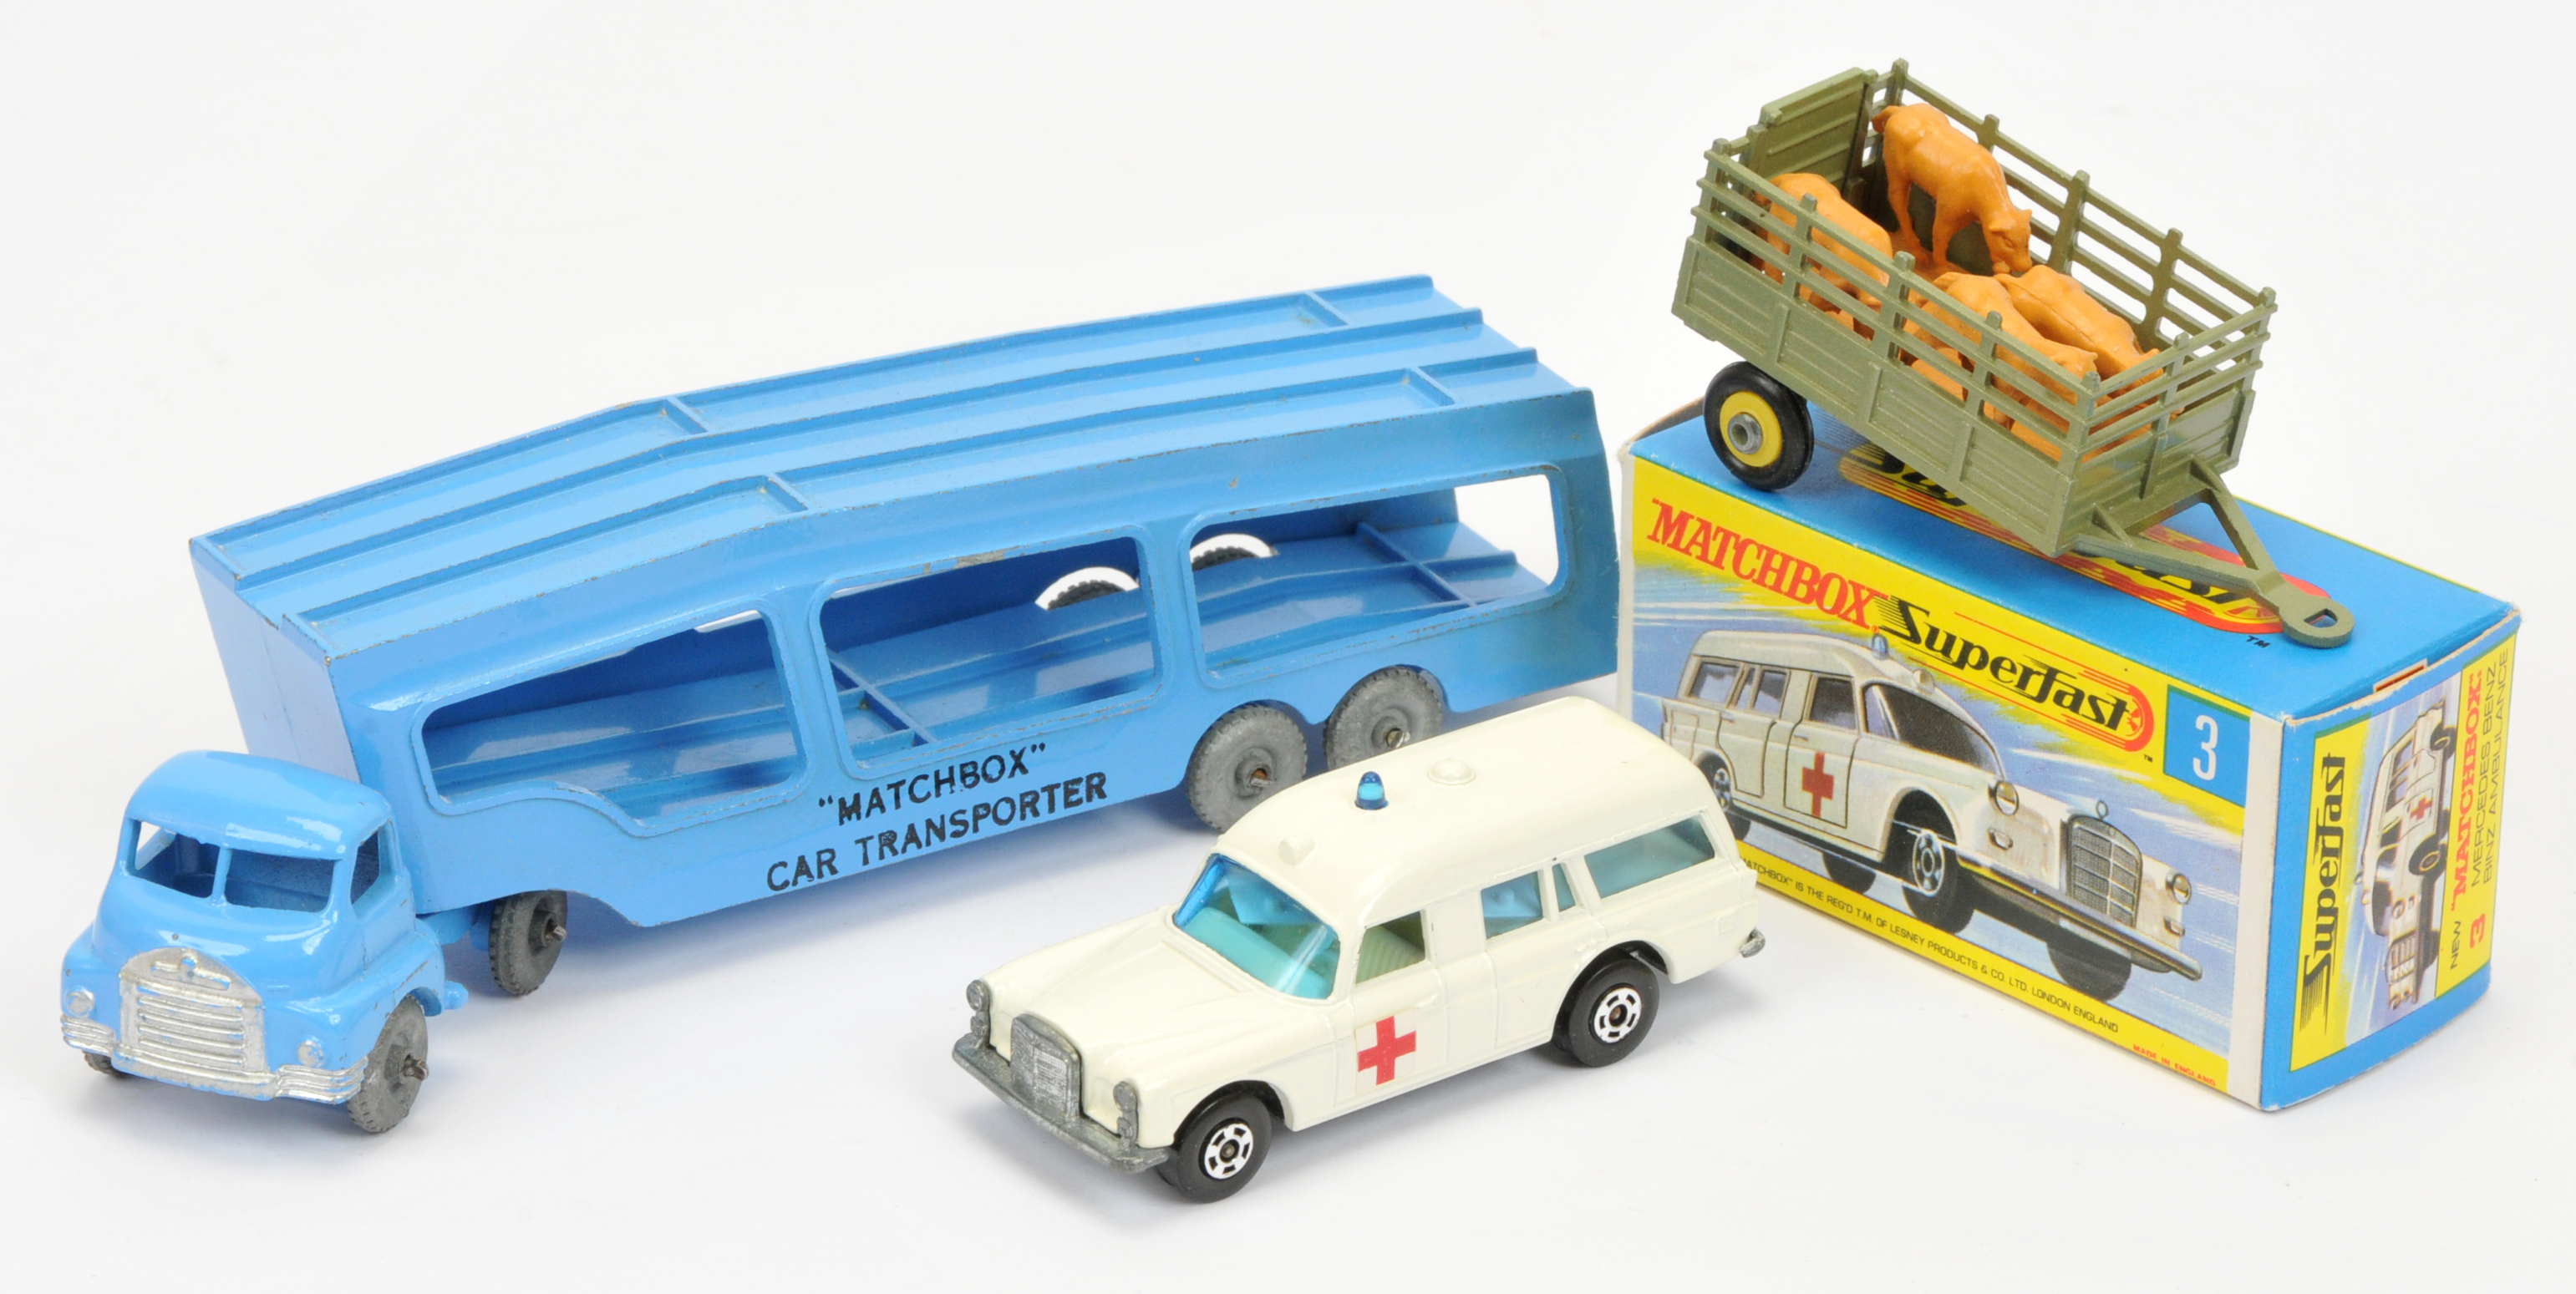 Matchbox mixed group (1) Superfast 3a Mercedes Benz Binz Ambulance - off-white body with red cros...